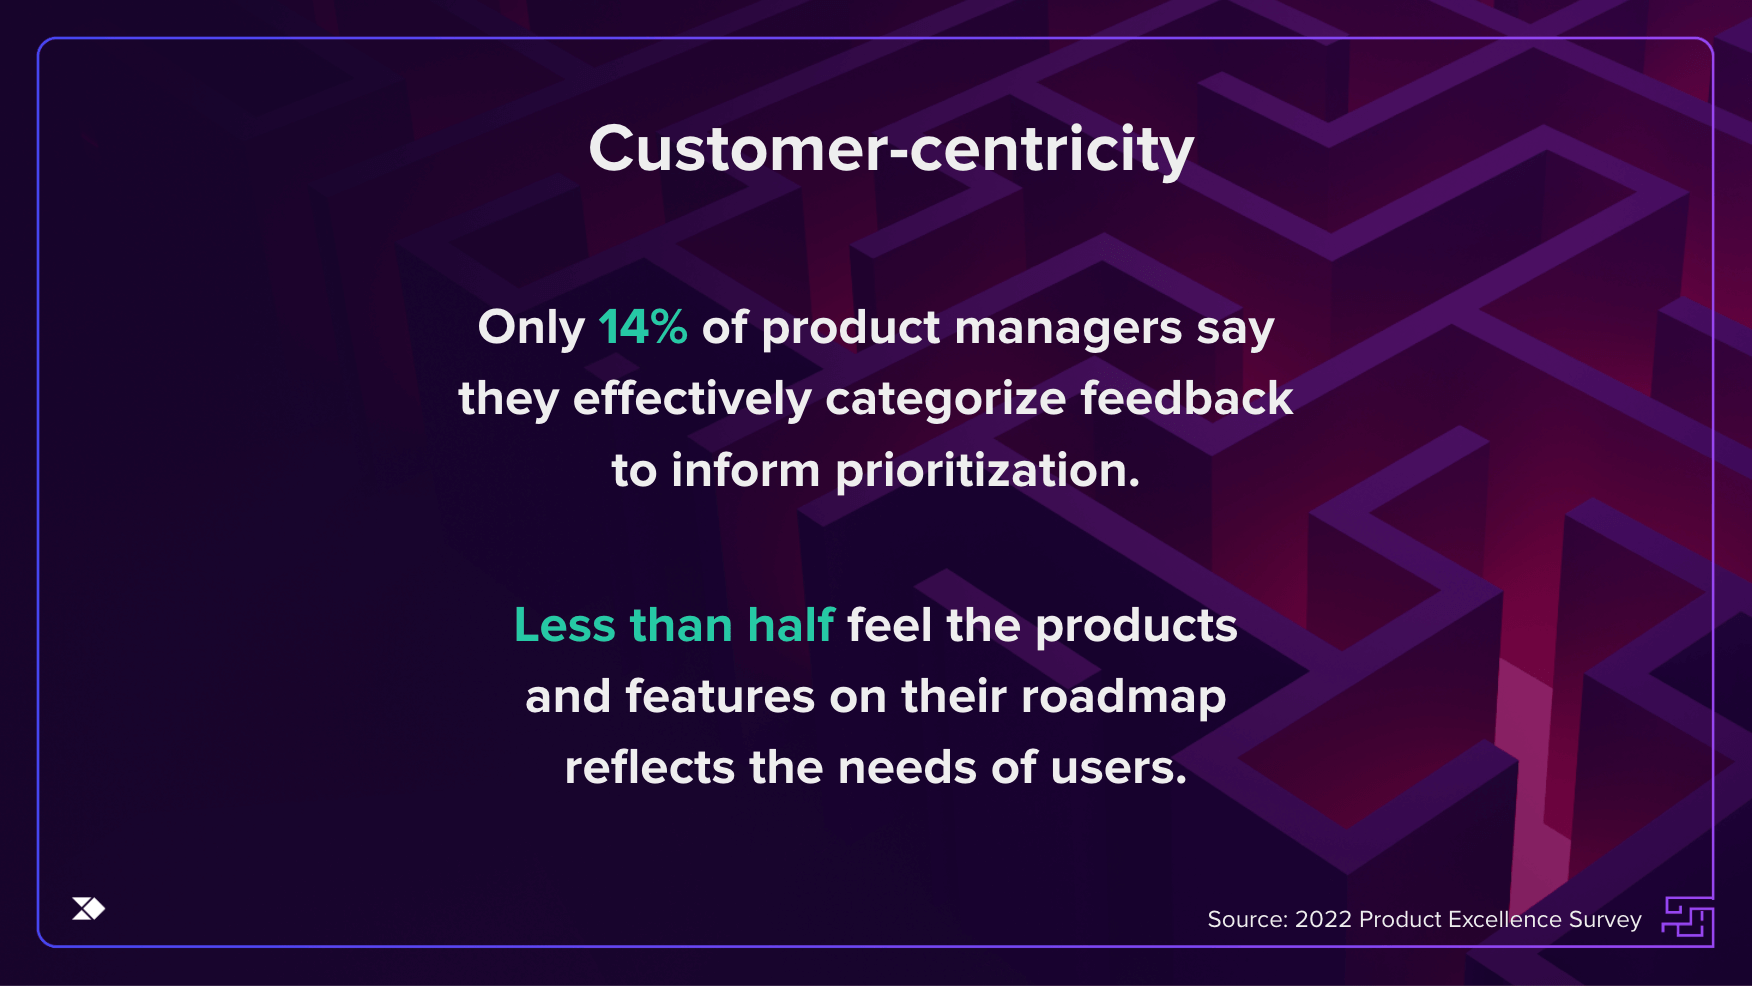 Customer-centricity is key to product success